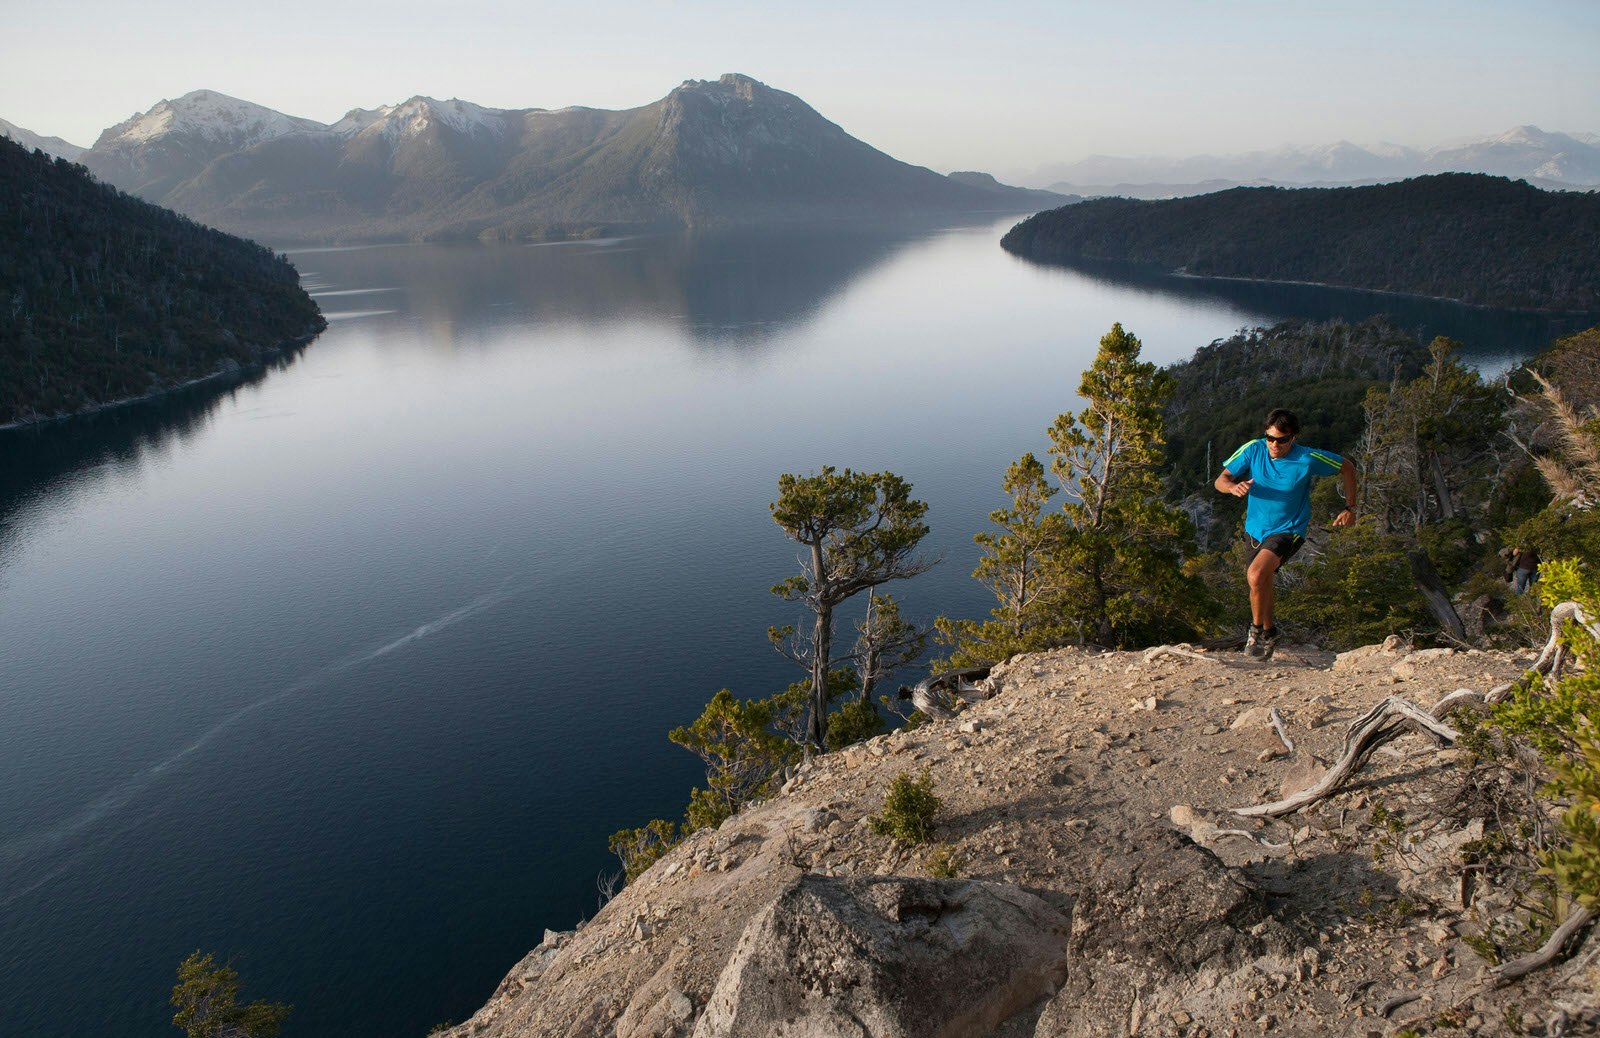 A runner ascends a rocky knoll, which slopes sharply down to a stunning lake; its shores are flanked by silhouetted, tree-covered sections of land, with mountains in the distance.